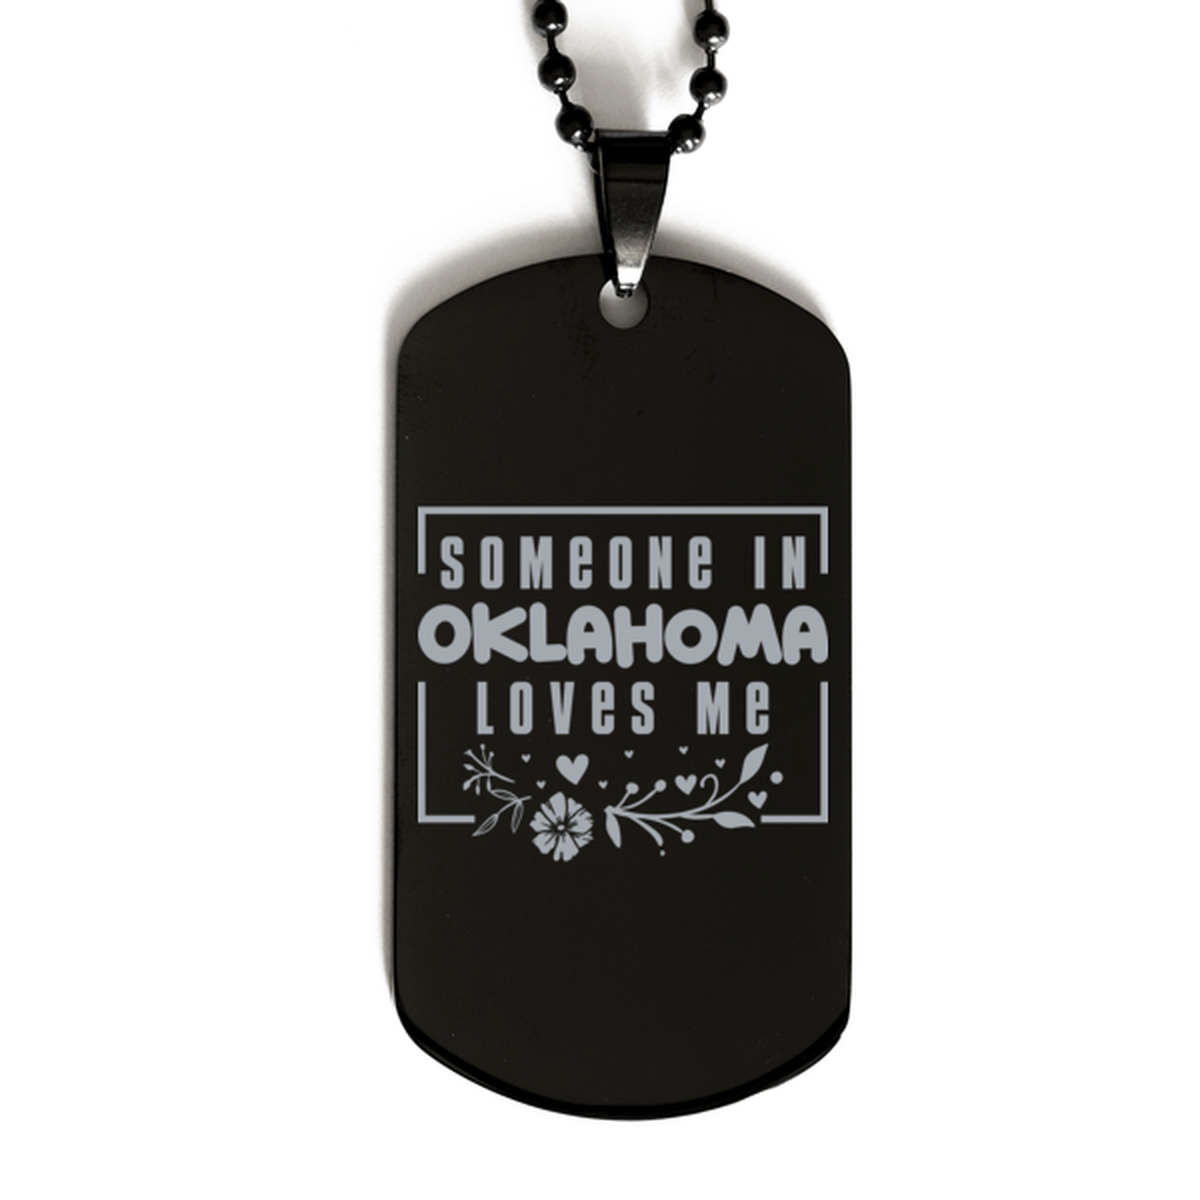 Cute Oklahoma Black Dog Tag Necklace, Someone in Oklahoma Loves Me, Best Birthday Gifts from Oklahoma Friends & Family